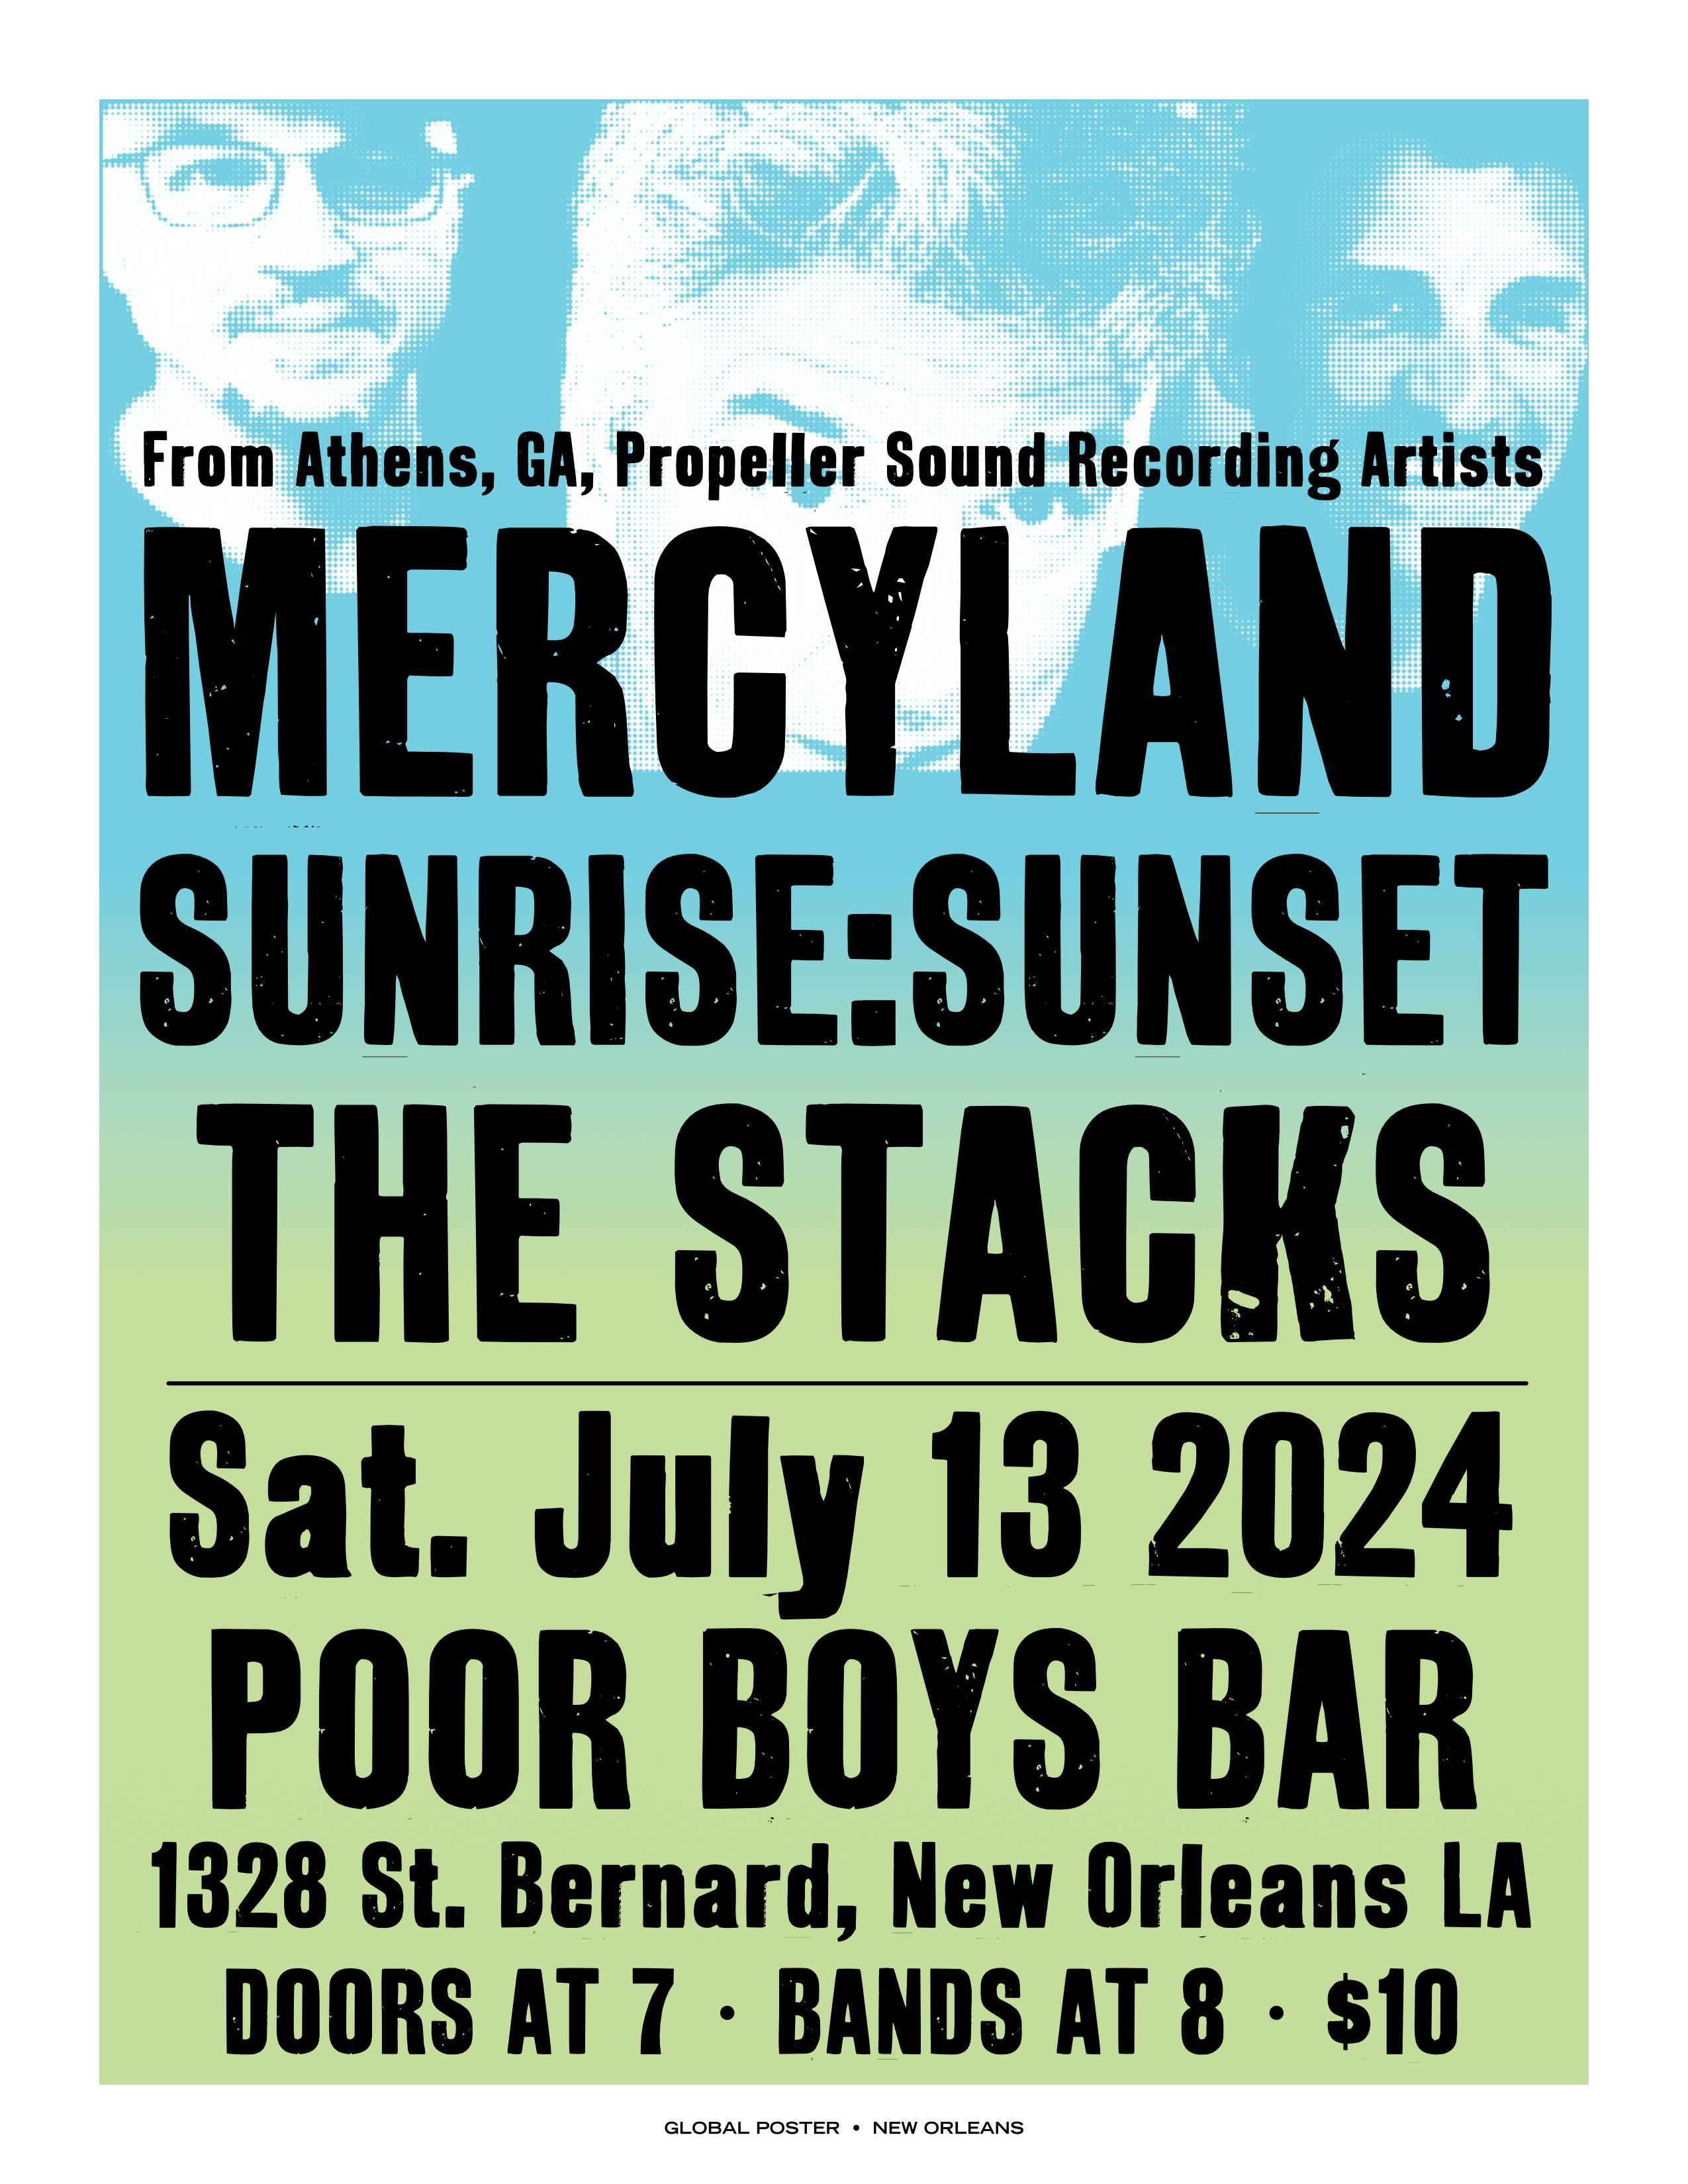 The Stacks with Mercyland and Sunrise:Sunset in New Orleans: Poor Boys Bar)